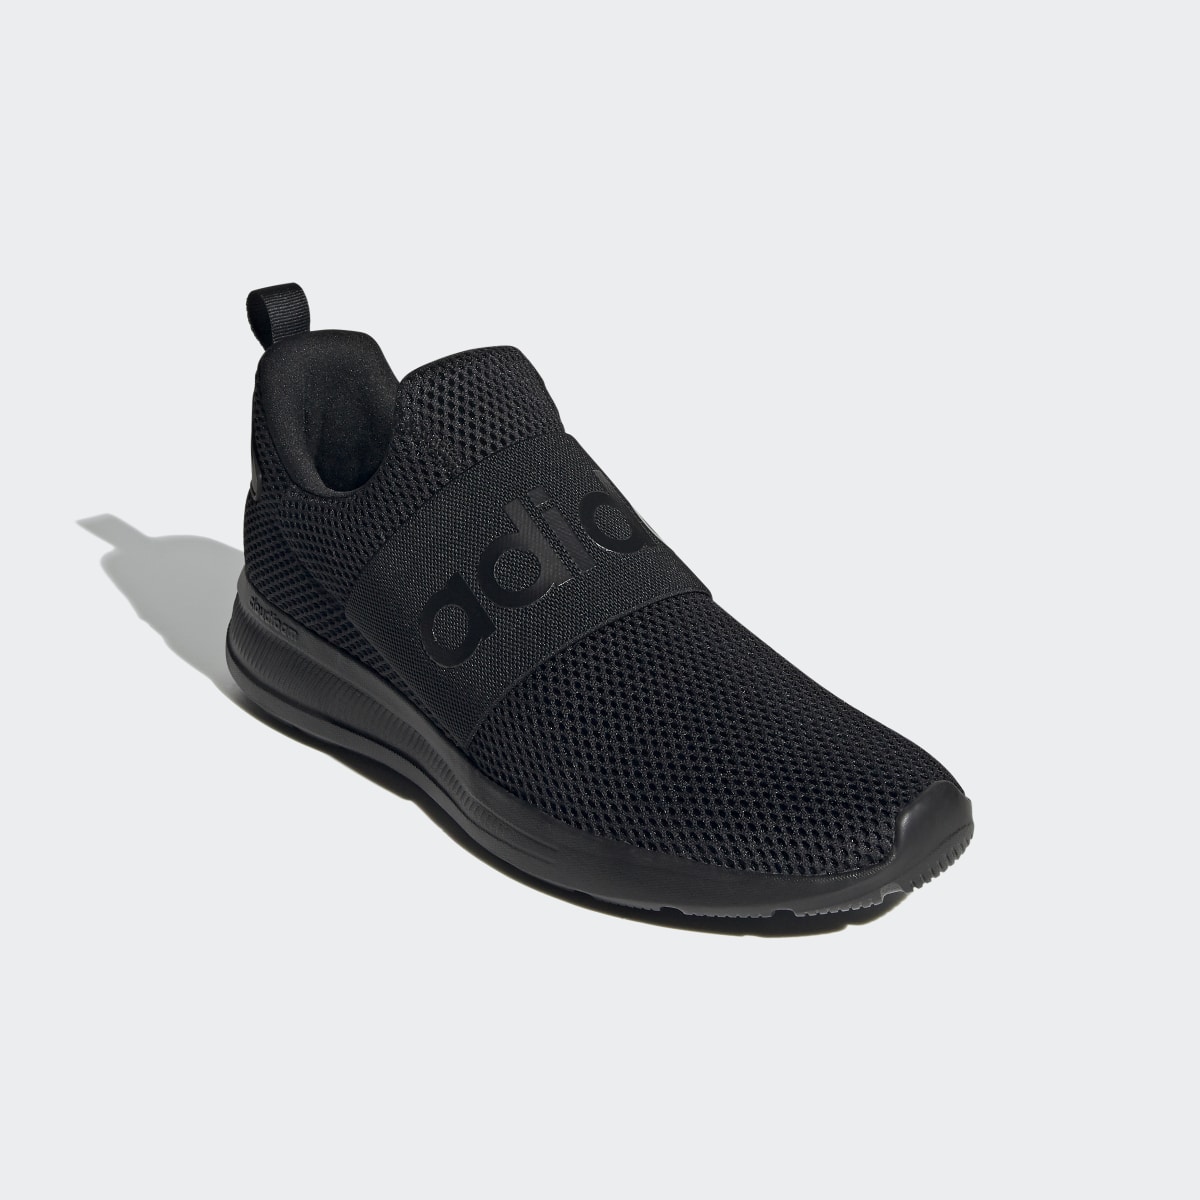 Adidas Lite Racer Adapt 4.0 Shoes. 5